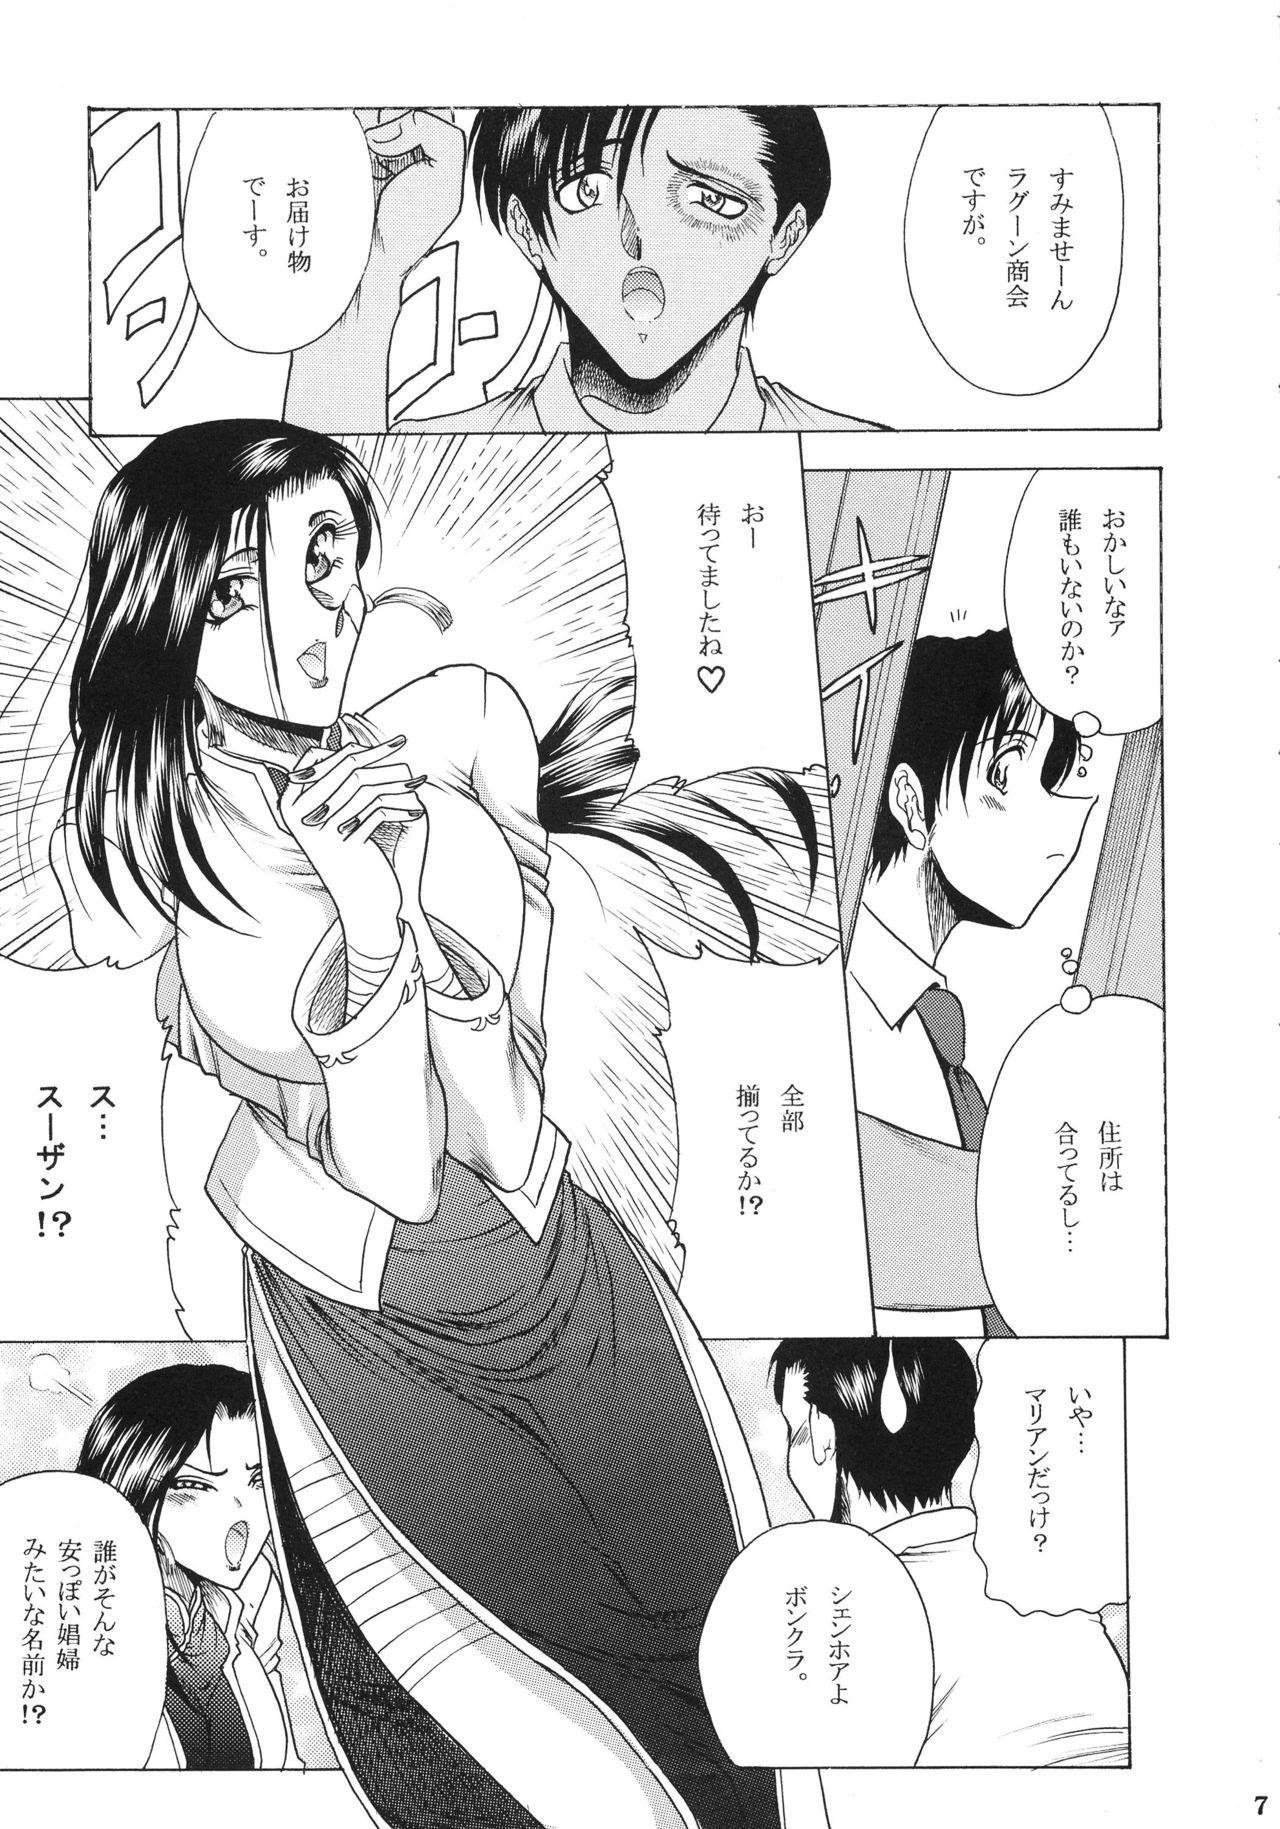 Swallow ZONE 38 China Syndrome - Black lagoon Chaturbate - Page 6